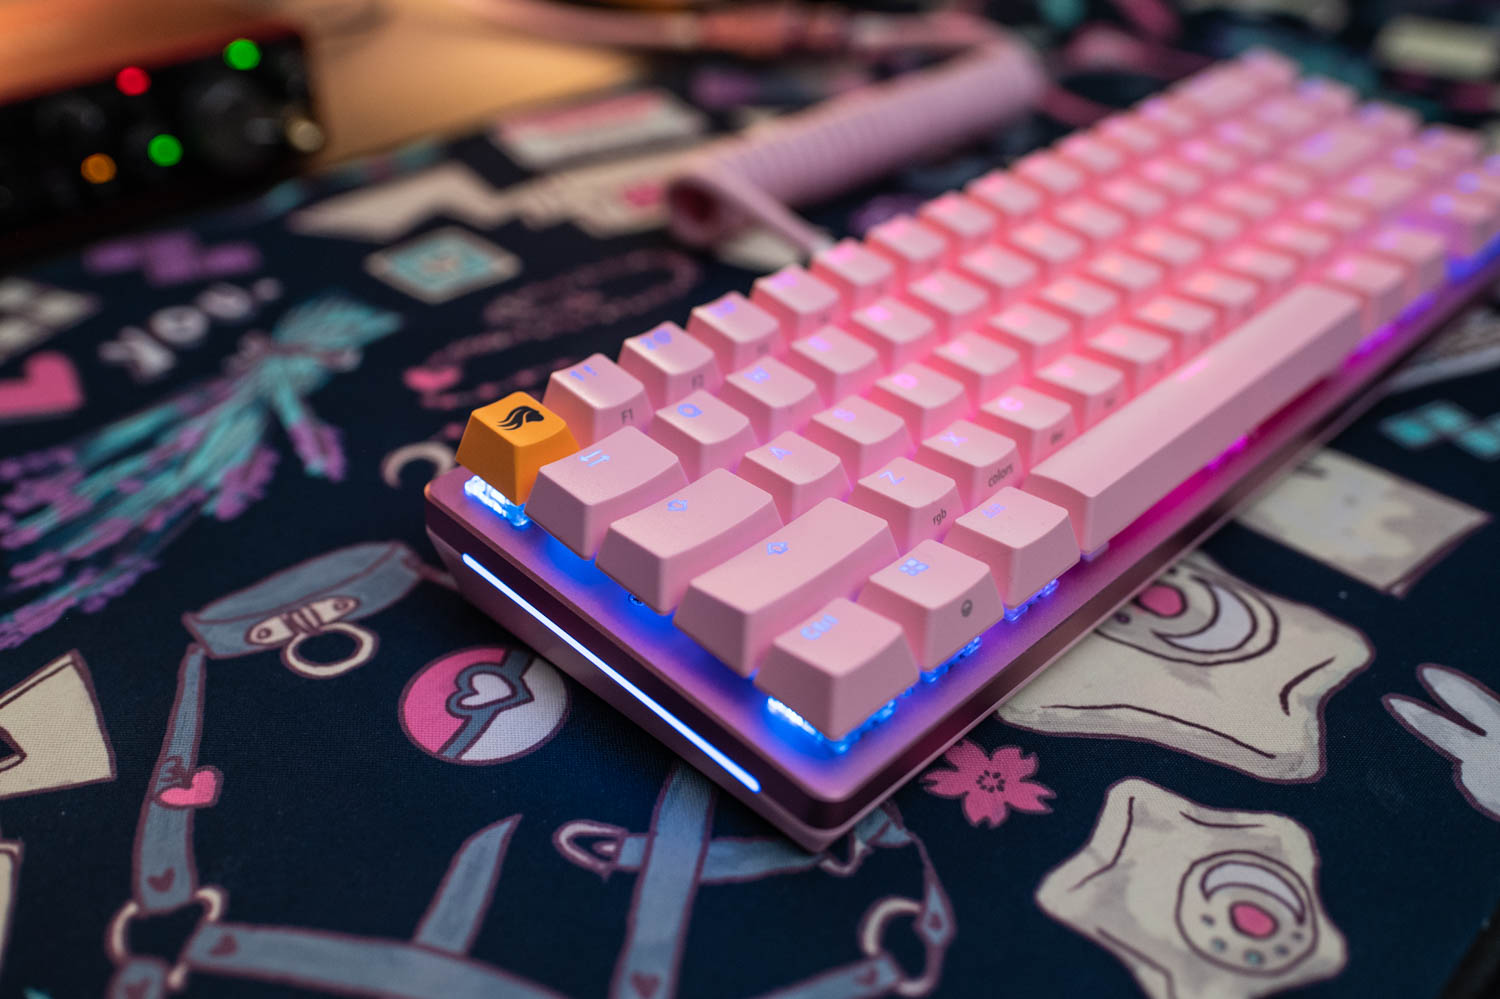 m.lvcrft ☻ on Twitter: "Found my new travel board: The @Glorious GMMK 2 in Pixel Pink 🌸♥️🎀 Been using it stock with the new Glorious Fox switches but want to shake things